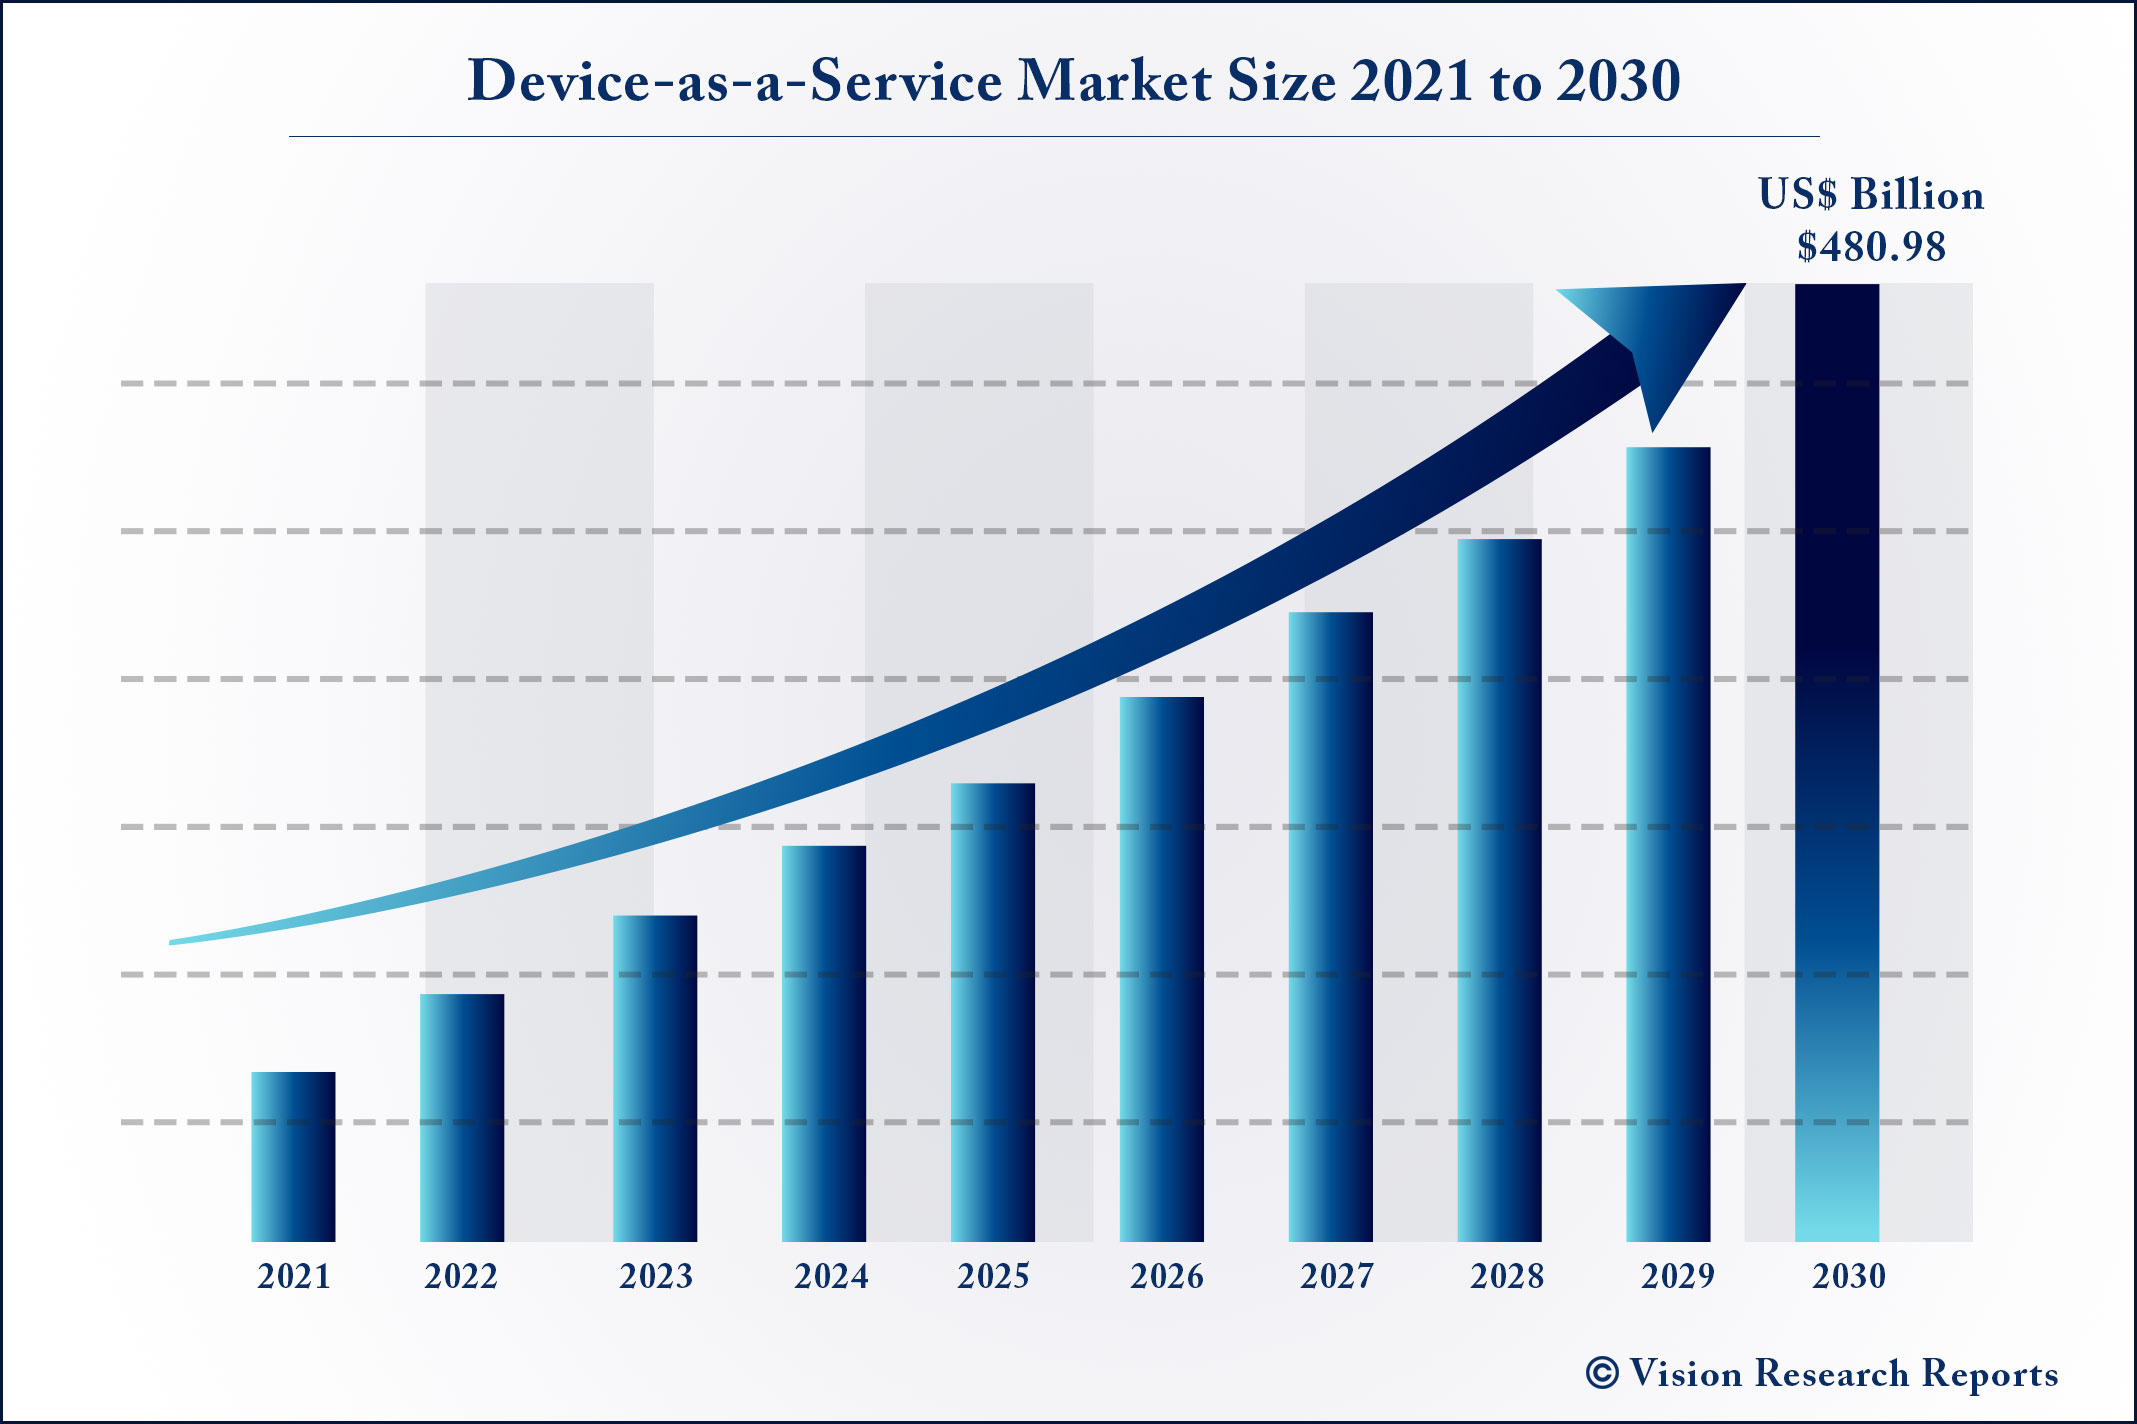 Device-as-a-Service Market Size 2021 to 2030